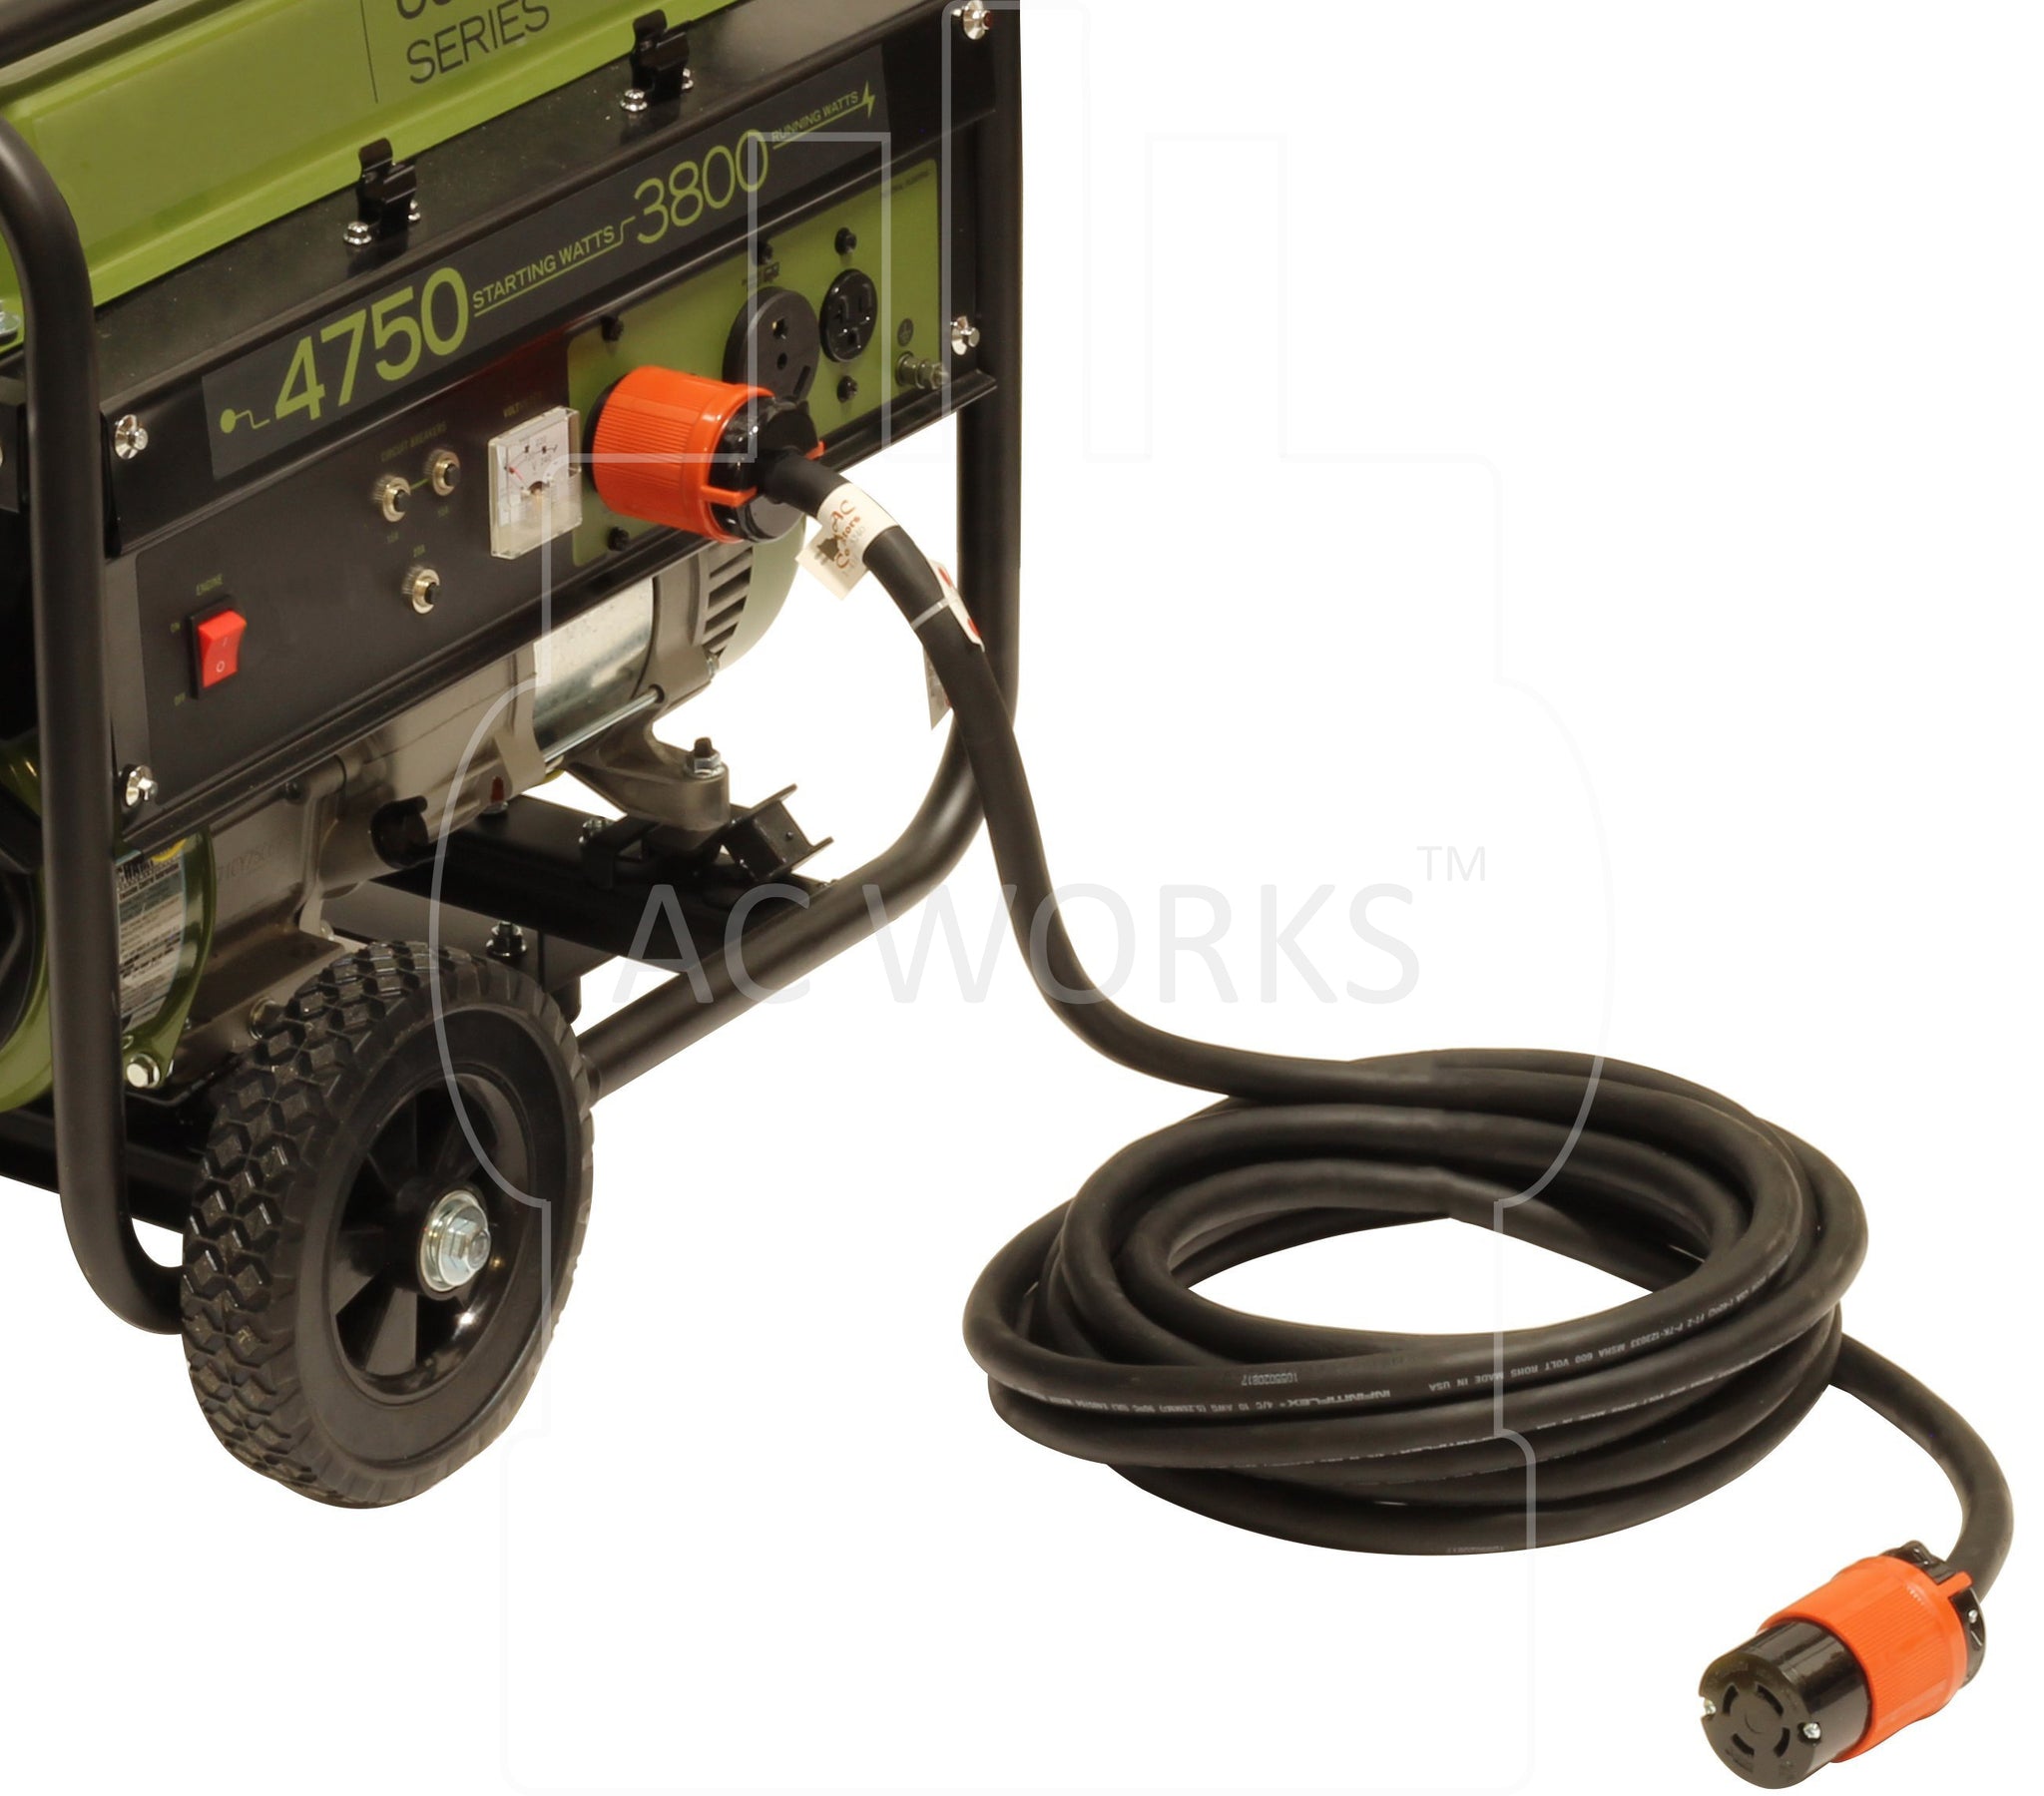 AC WORKS® L14-30 Generator Power Extension Cord – AC Connectors